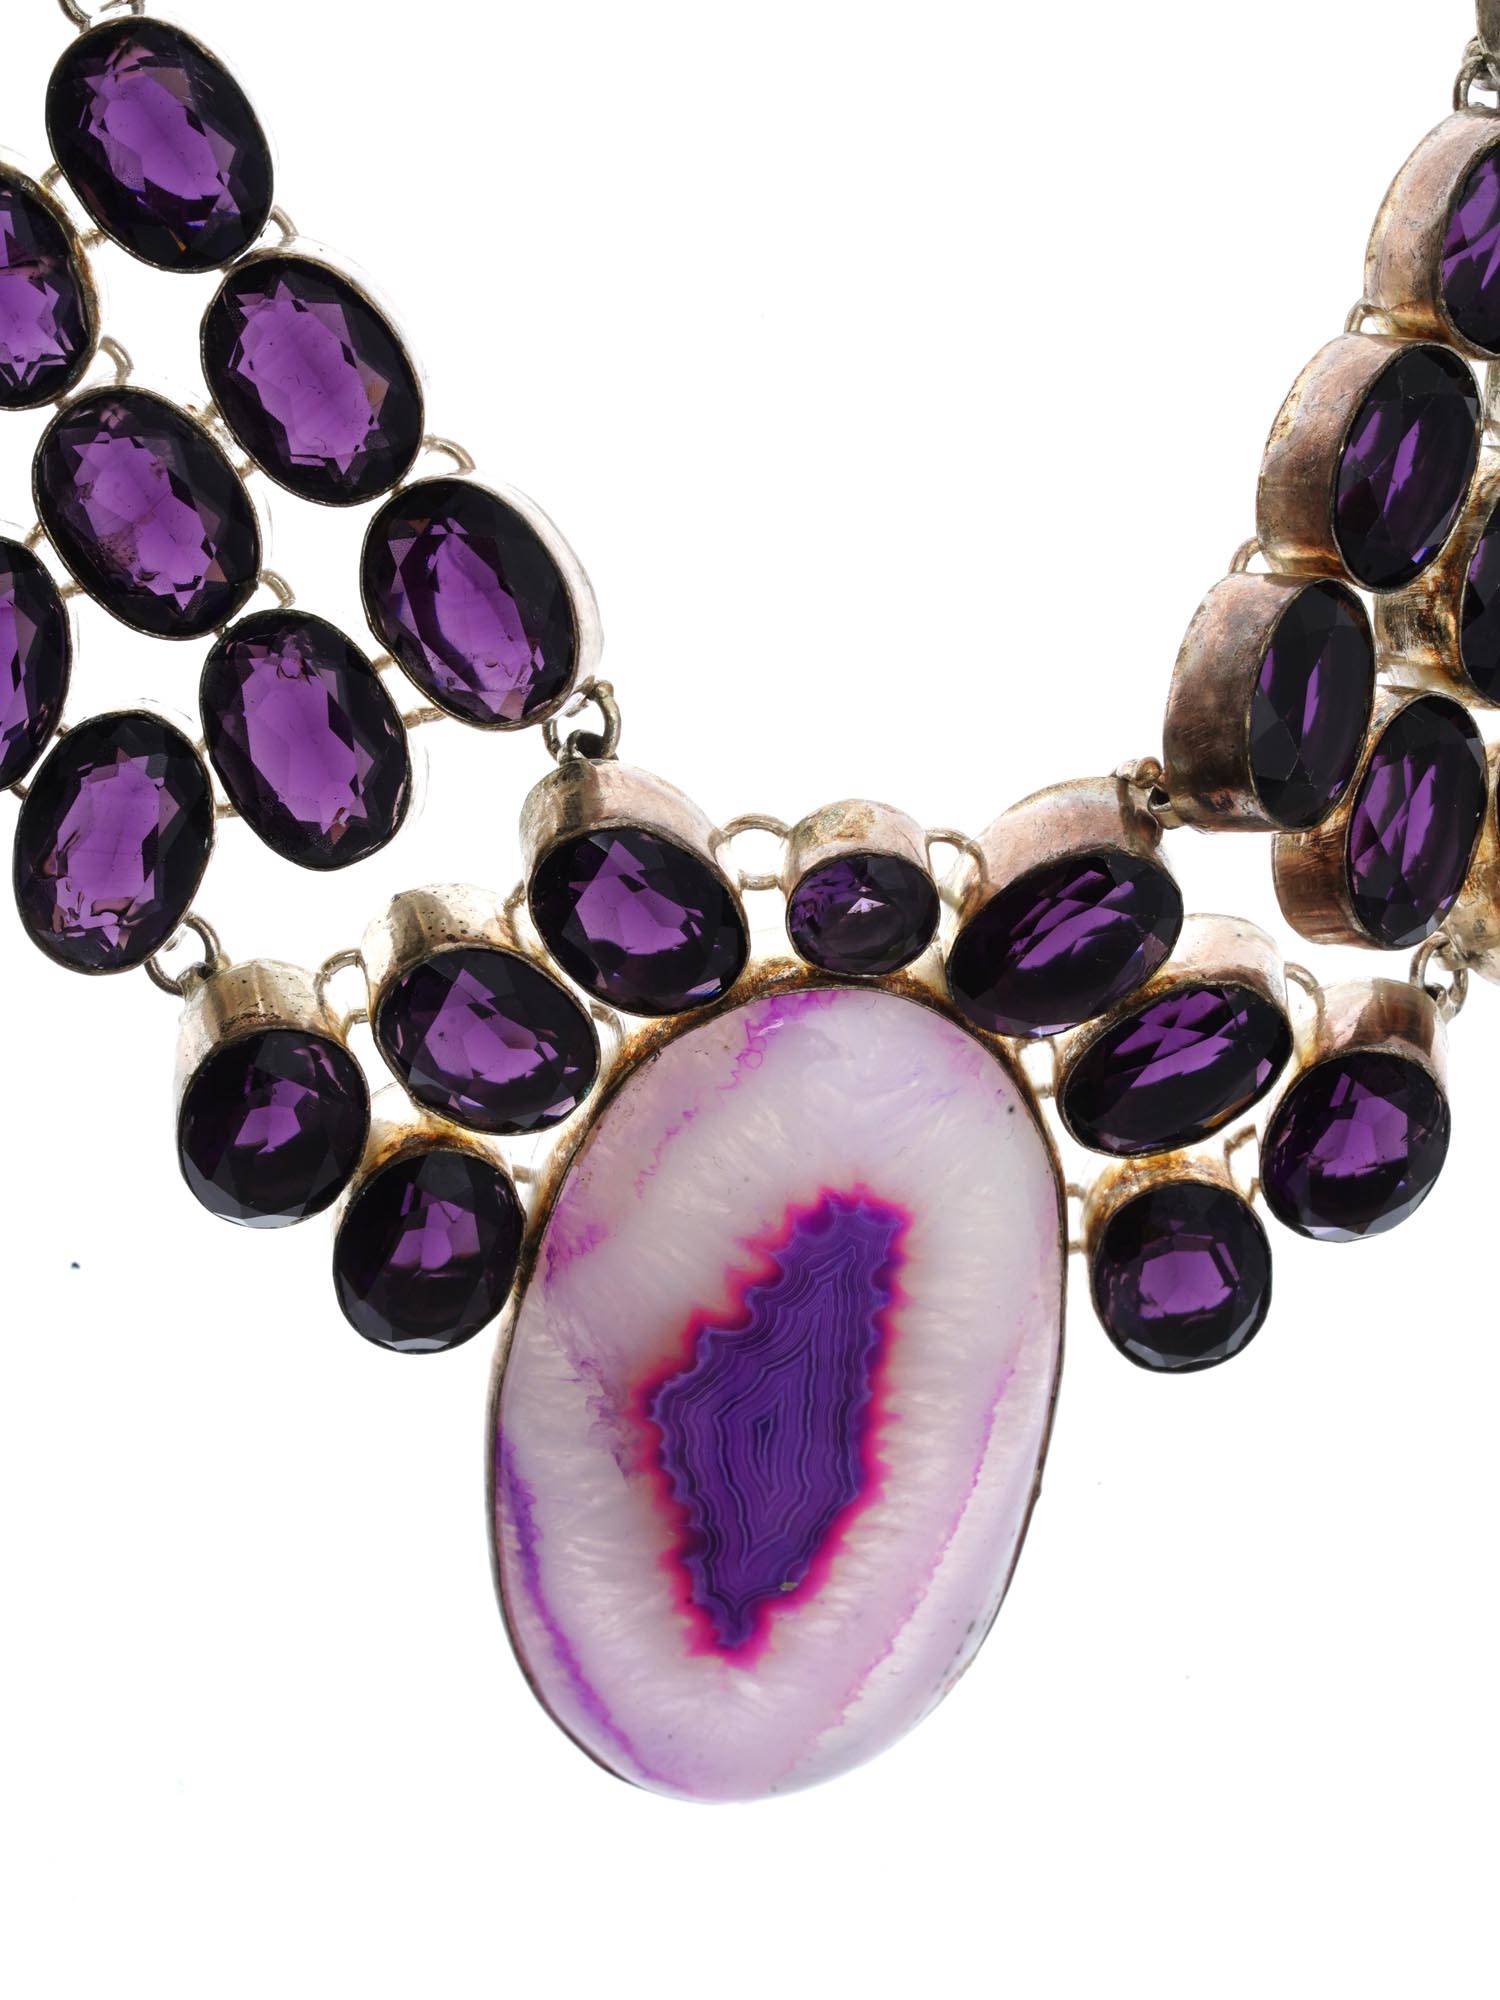 STERLING SILVER NECKLACE W DYED AGATE AMETHYSTS PIC-4